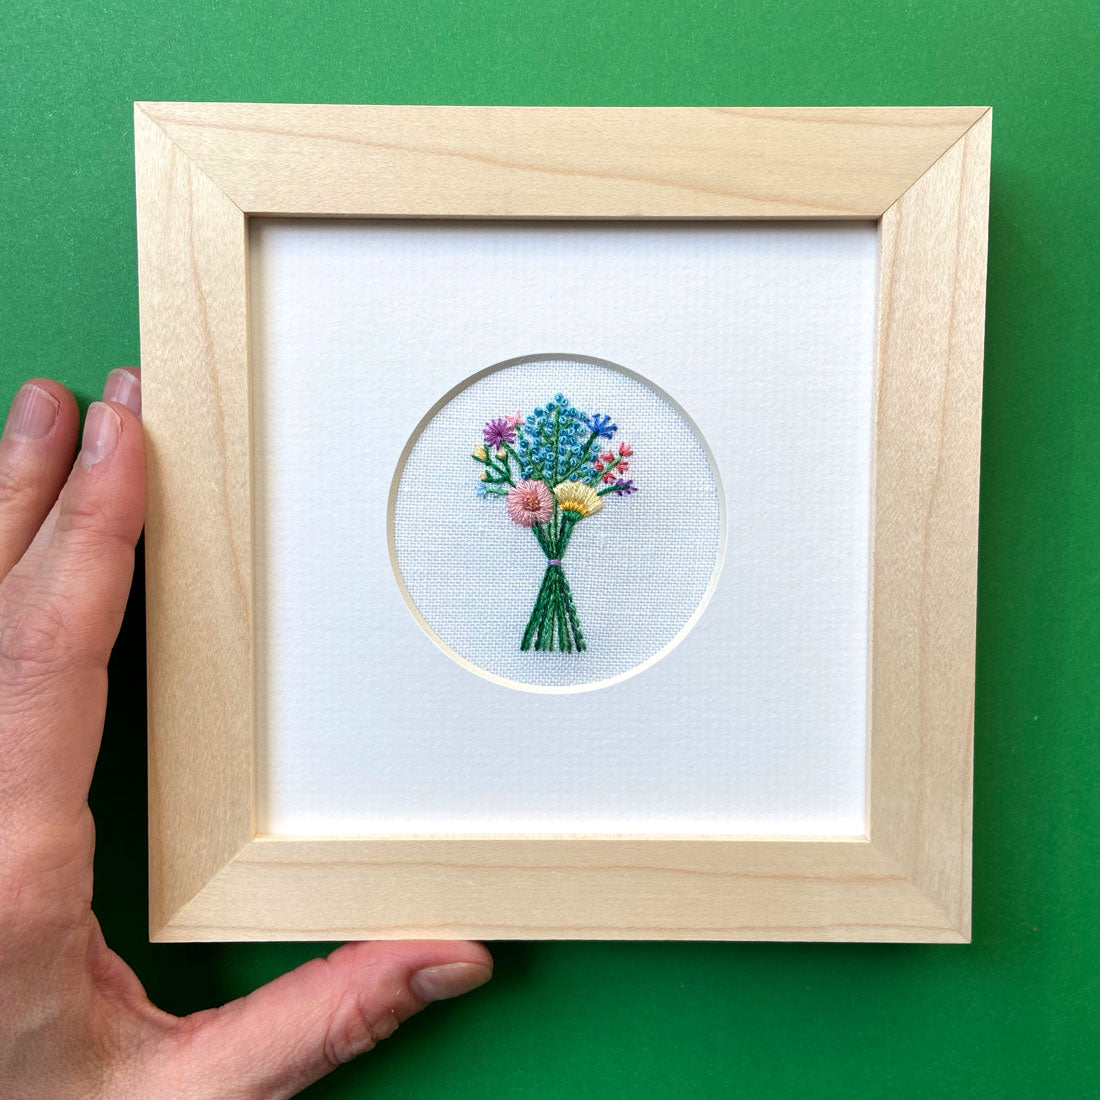 Bouquet with Blue Buds on White Linen Hand Embroidered Art